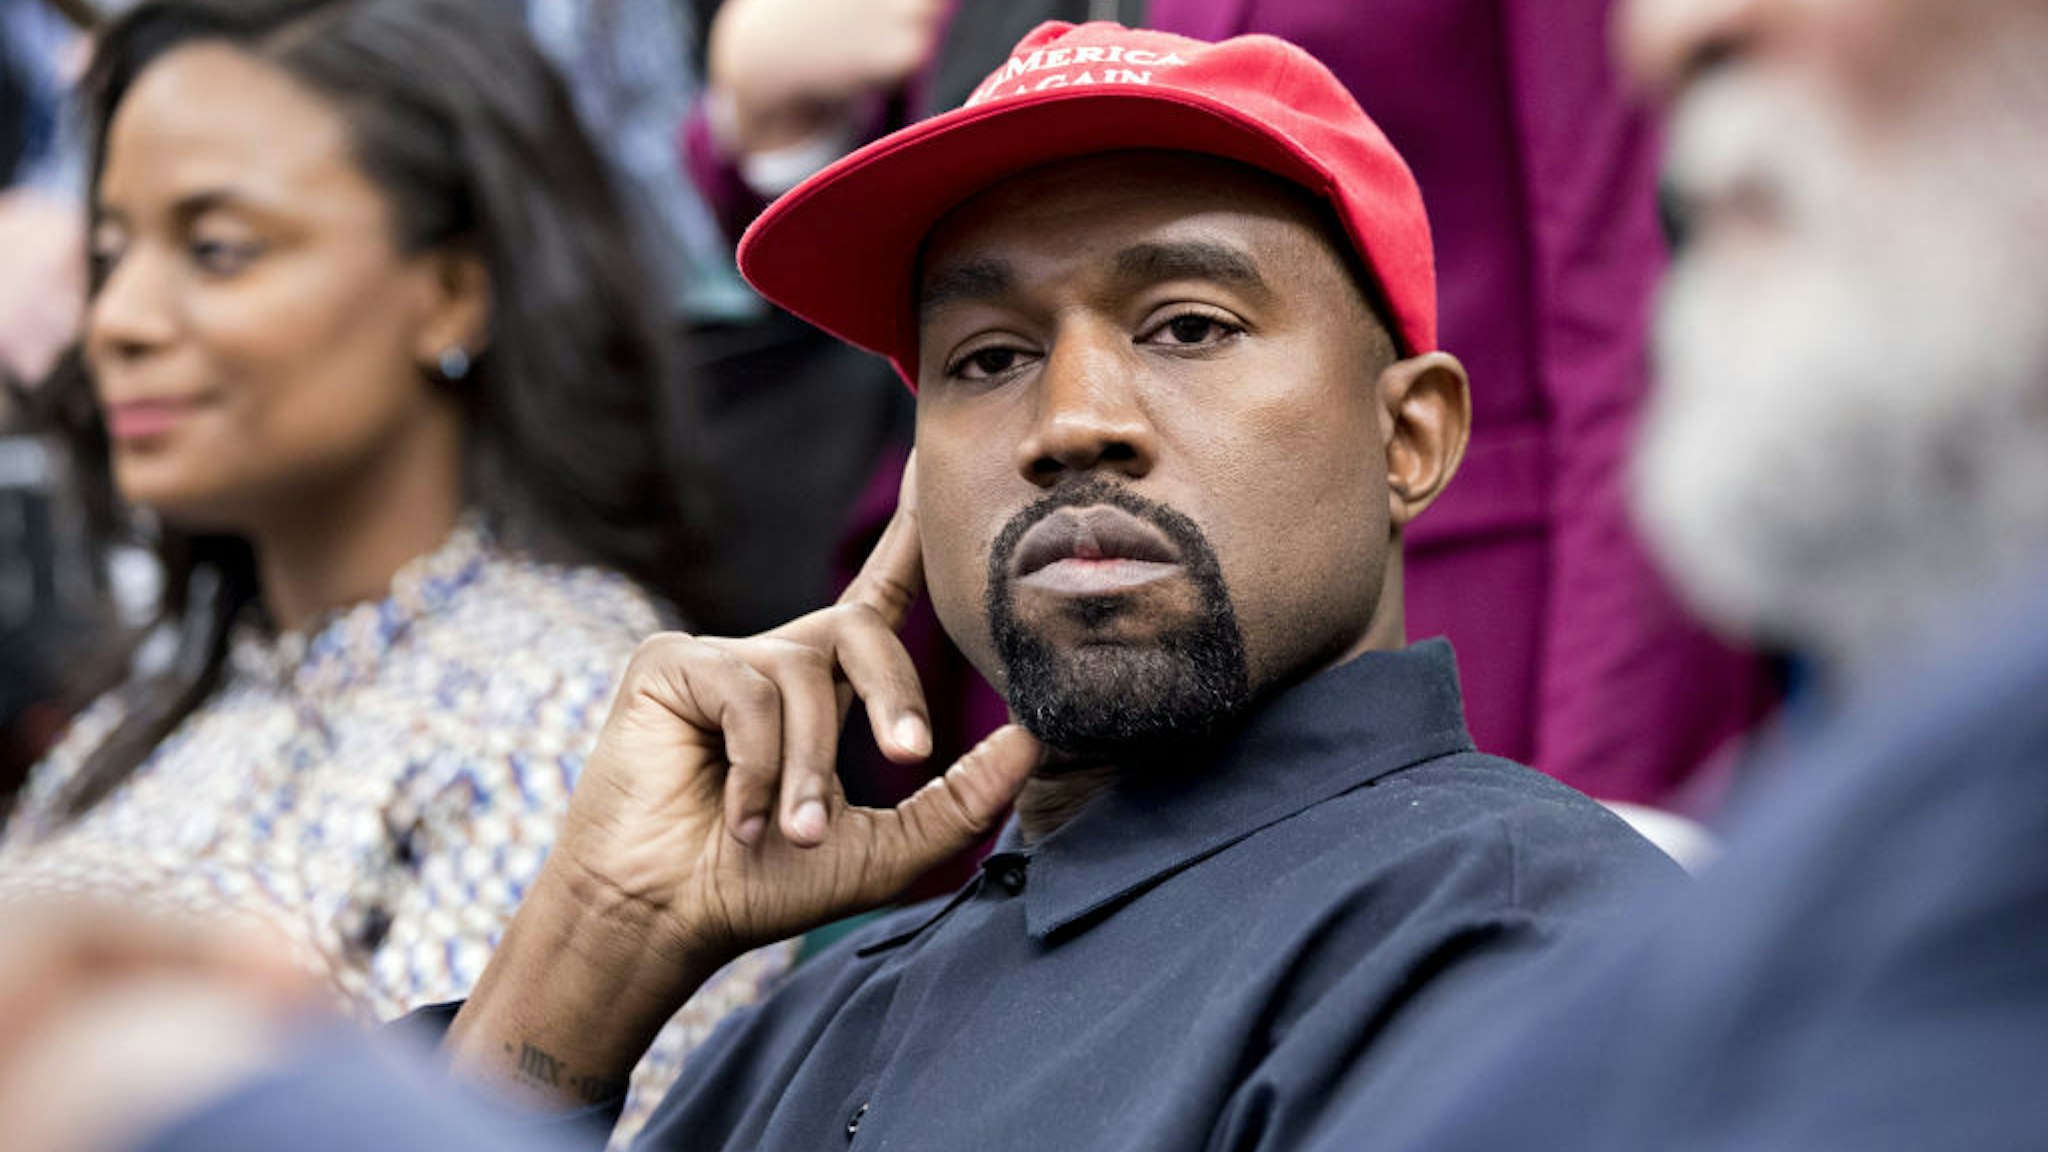 Rapper Kanye West listens during a meeting with U.S. President Donald Trump, not pictured, in the Oval Office of the White House in Washington, D.C., U.S., on Thursday, Oct. 11, 2018.